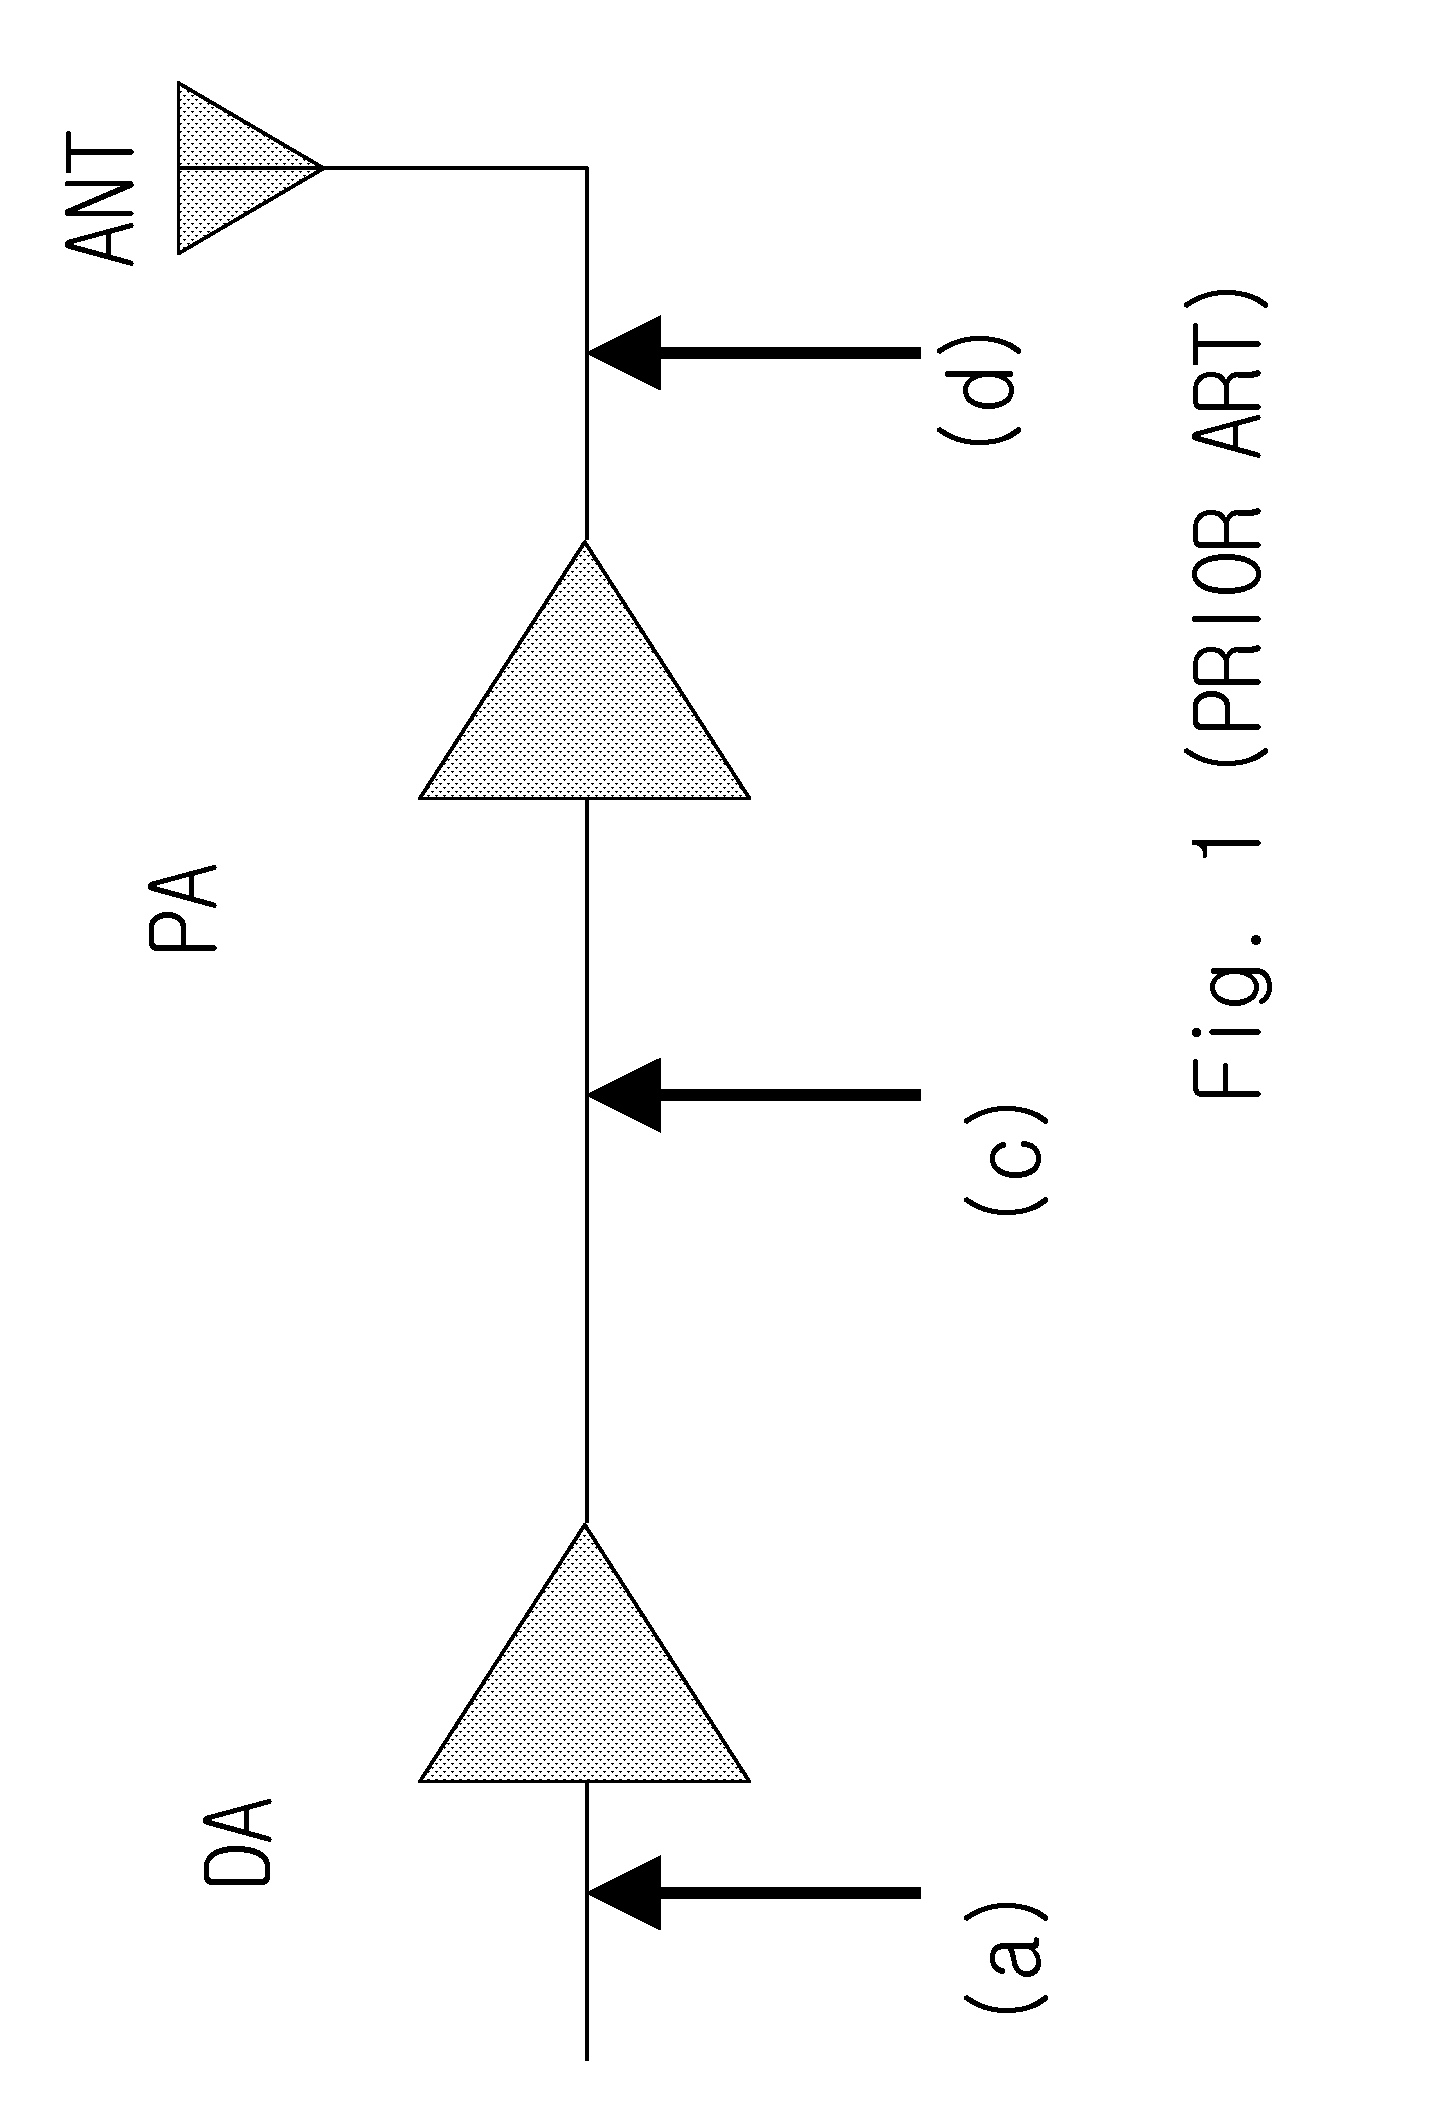 Amplification system for interference suppression in wireless communications